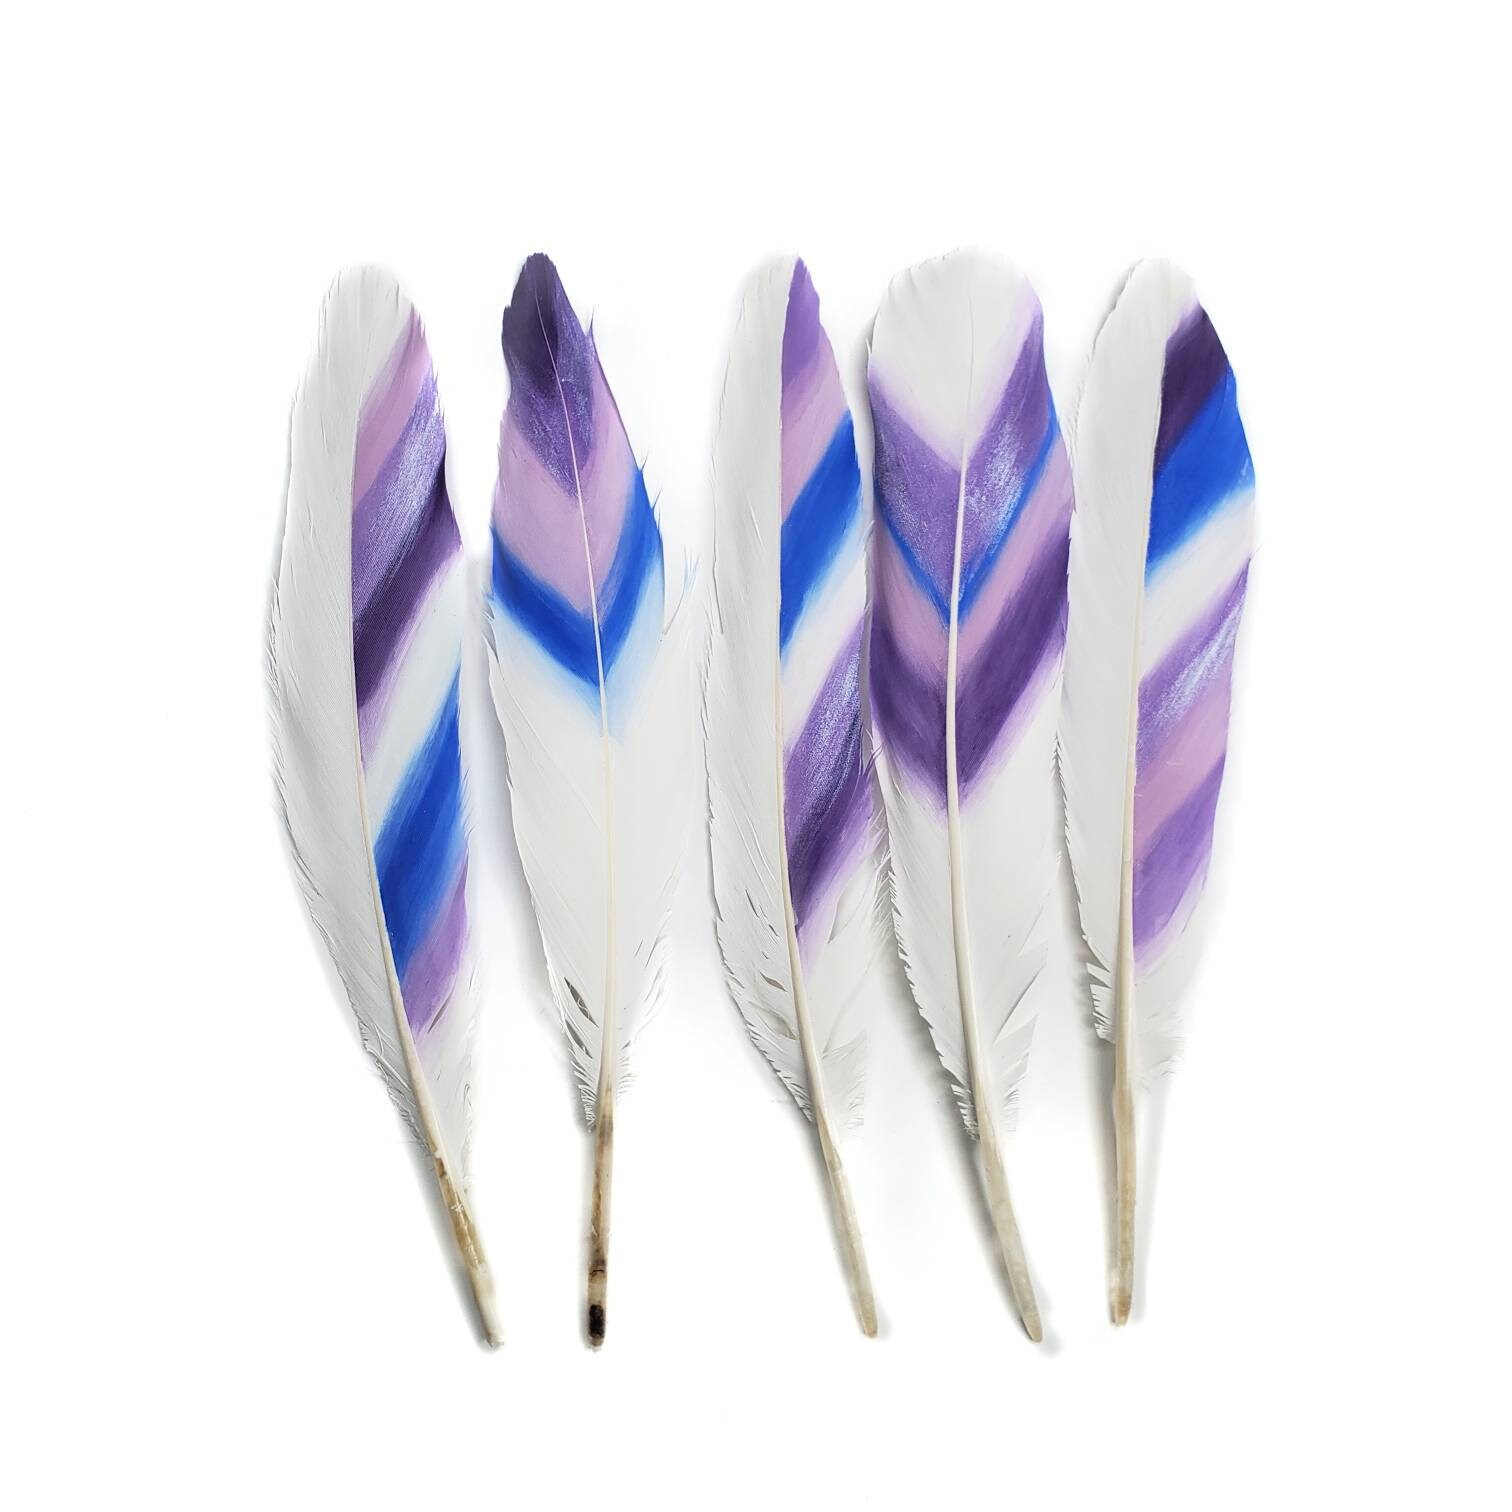 Hand Painted Goose Feathers, 5 Pieces, 6.5-8 Inches